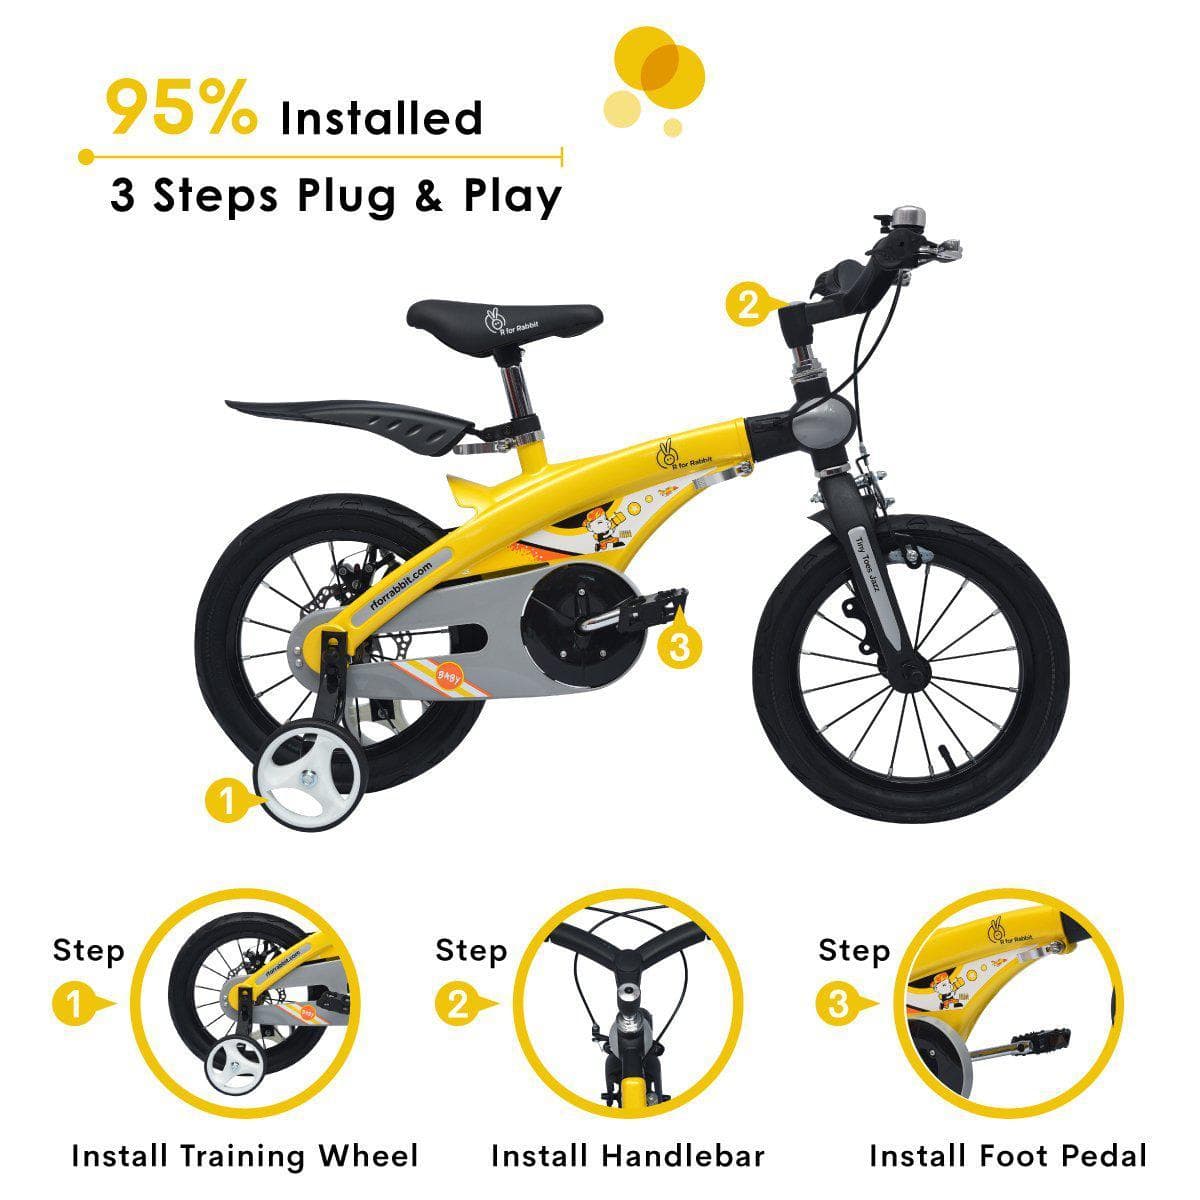 Tiny Toes Jazz - The Smart Plug and Play Bicycle - 14 inch (Yellow) | R for Rabbit by R for Rabbit, India Baby Transport